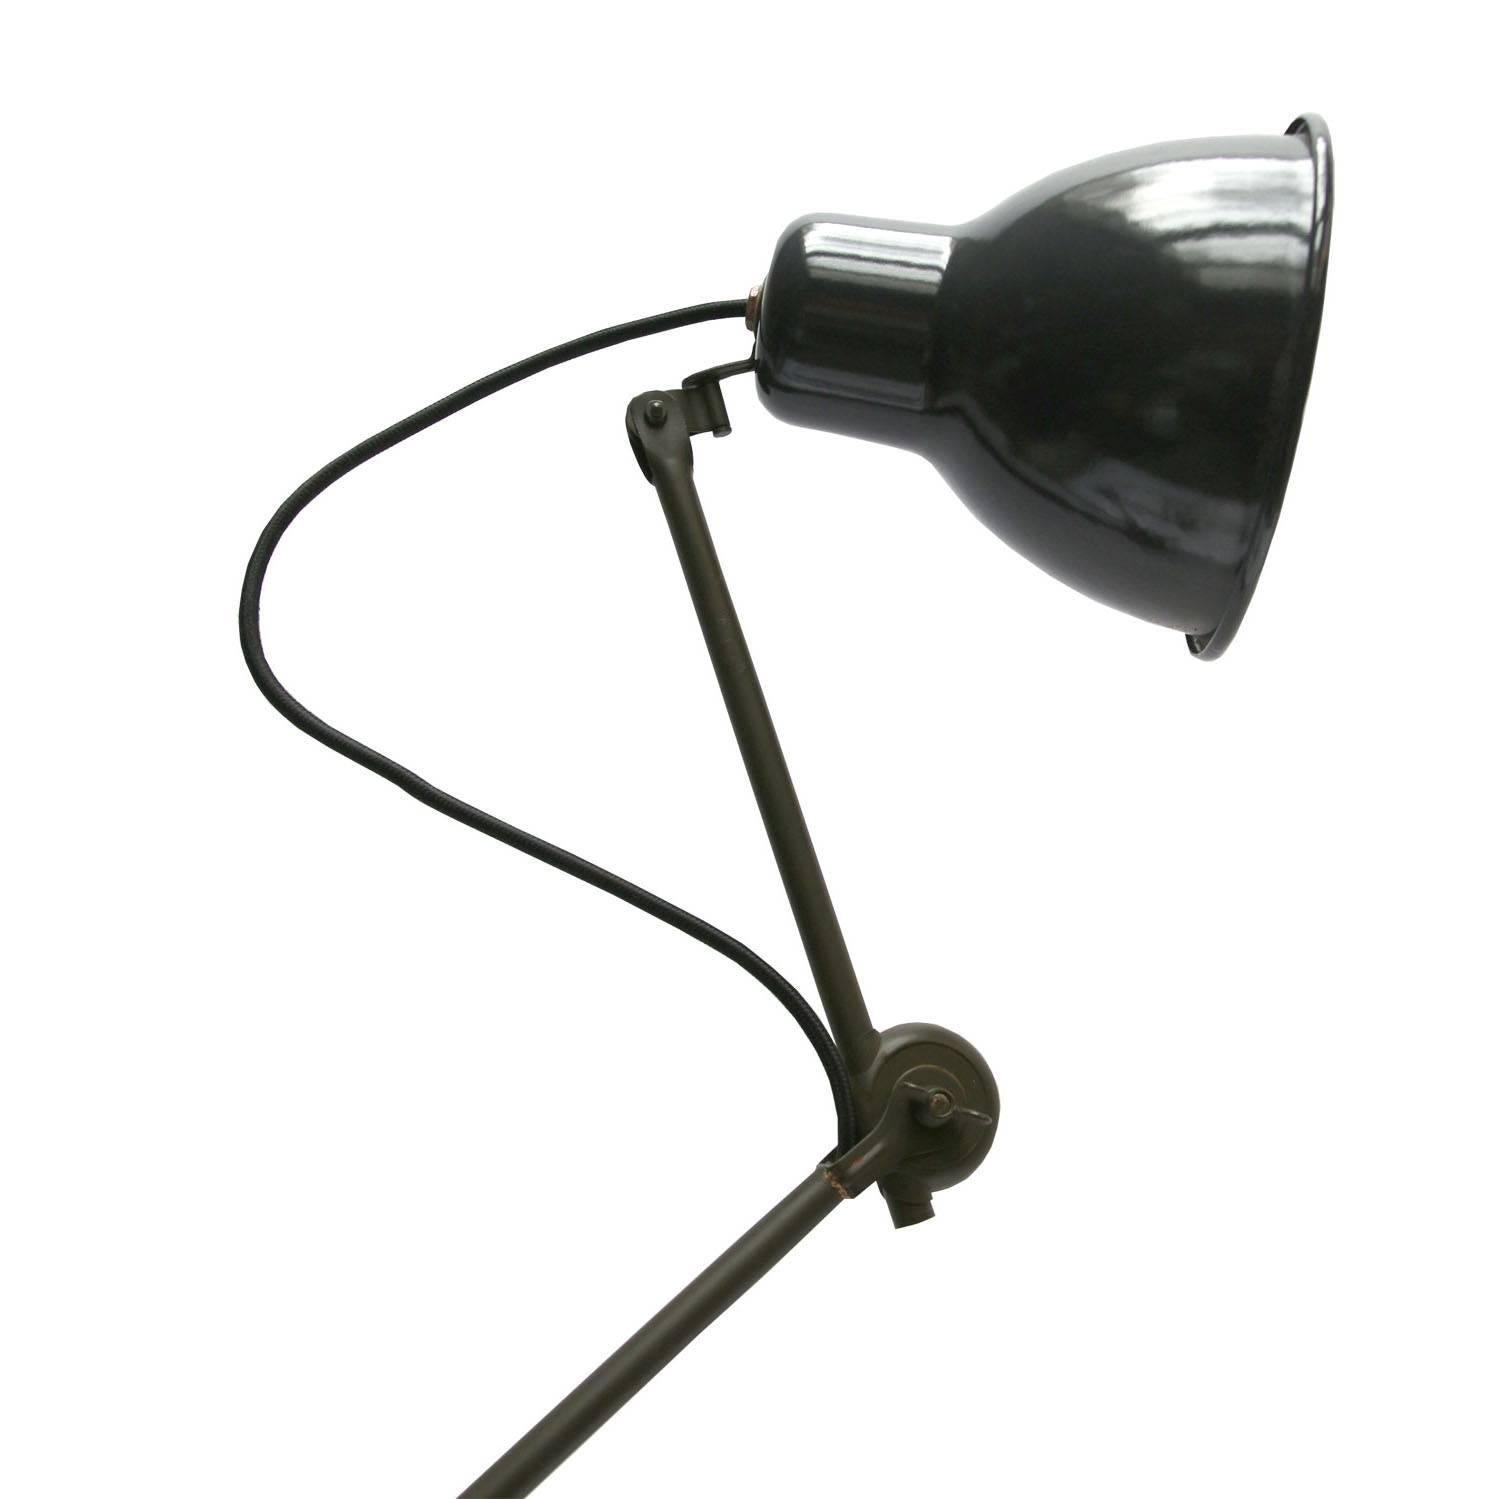 Industrial work light with clamp.

Weight: 2.00 kg / 4.4 lb

Priced per individual item. All lamps have been made suitable by international standards for incandescent light bulbs, energy-efficient and LED bulbs. E26/E27 bulb holders and new wiring